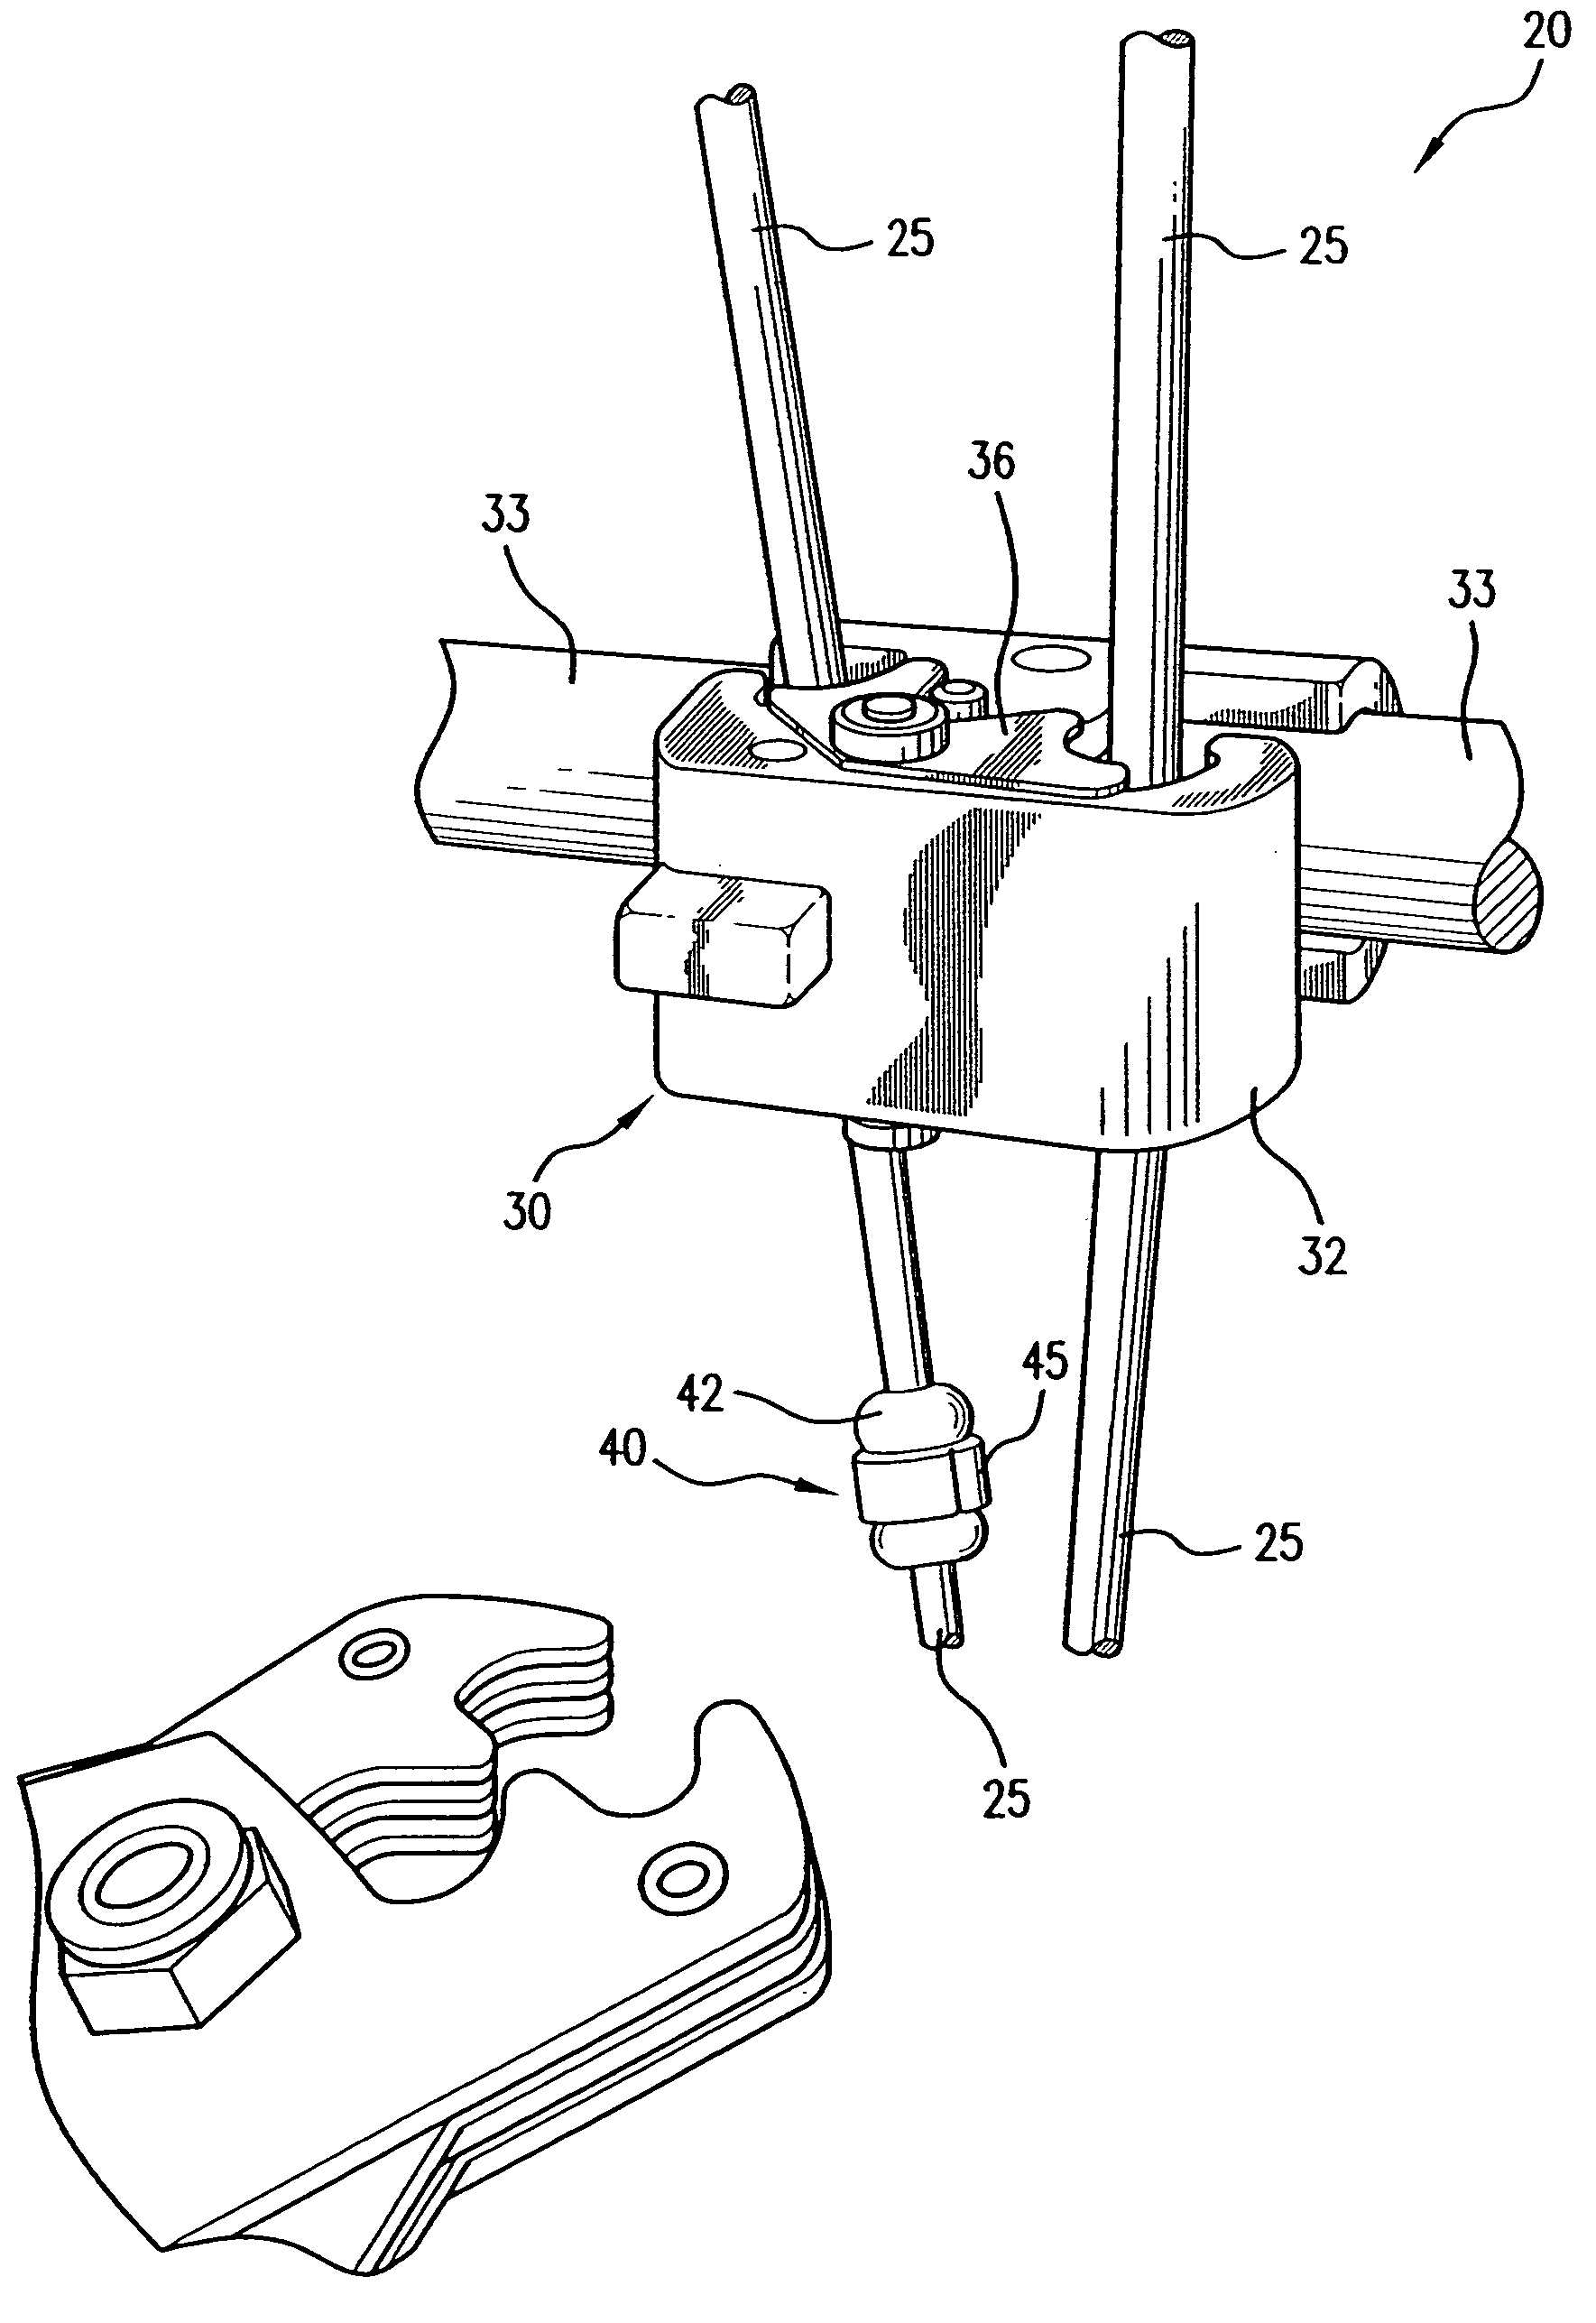 Apparatus and method for identifying a position of a bowstring